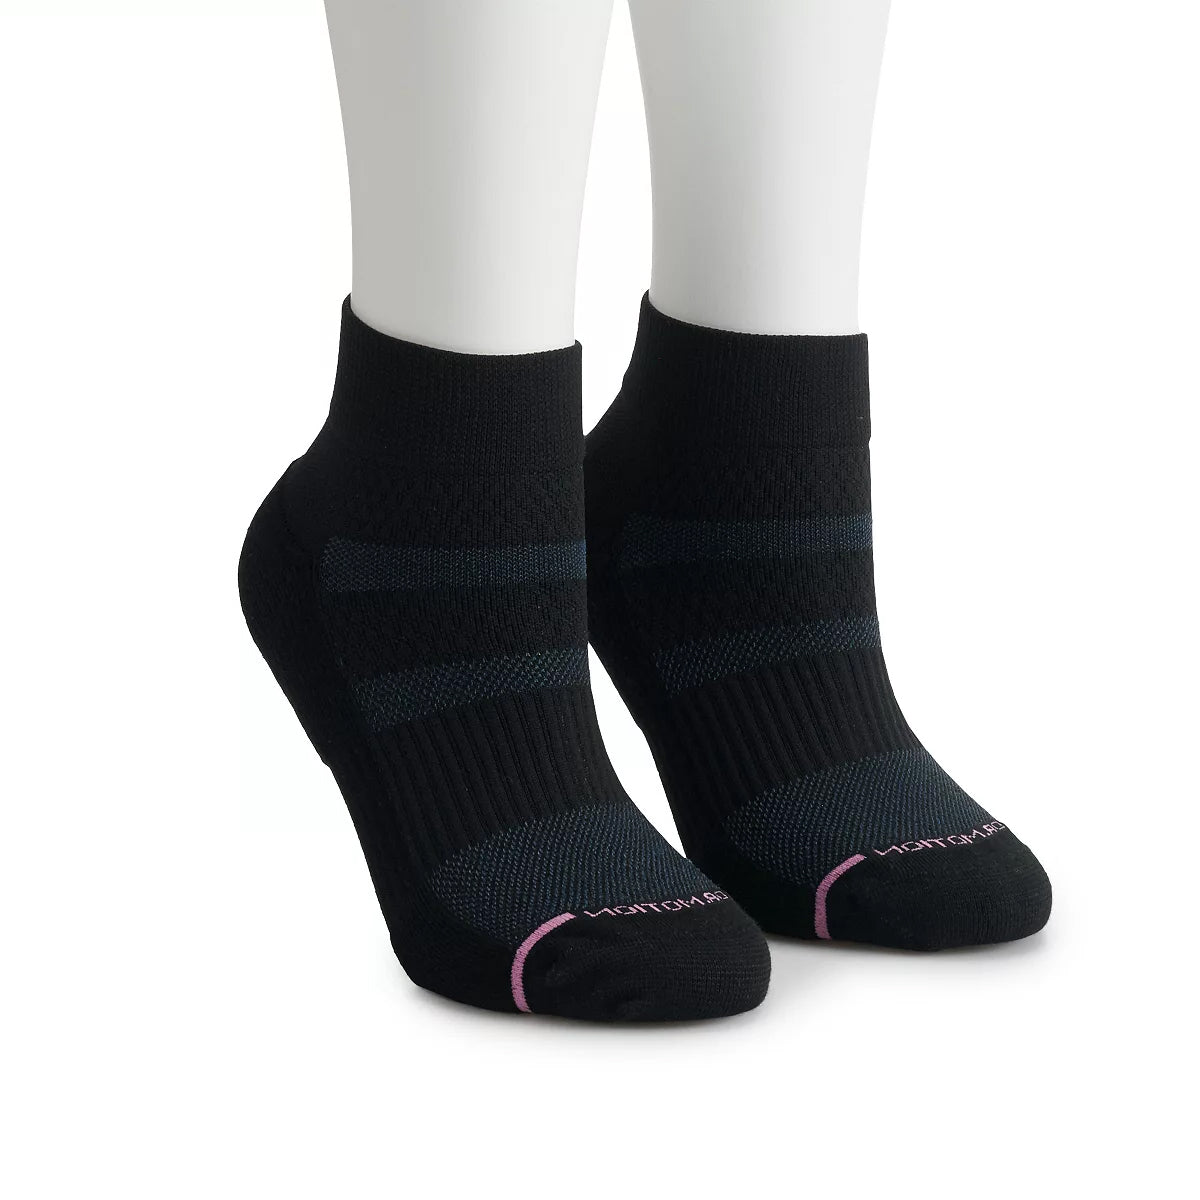 Pair of Dr. Motion ankle compression solid black socks on a mannequin's feet against a white background.